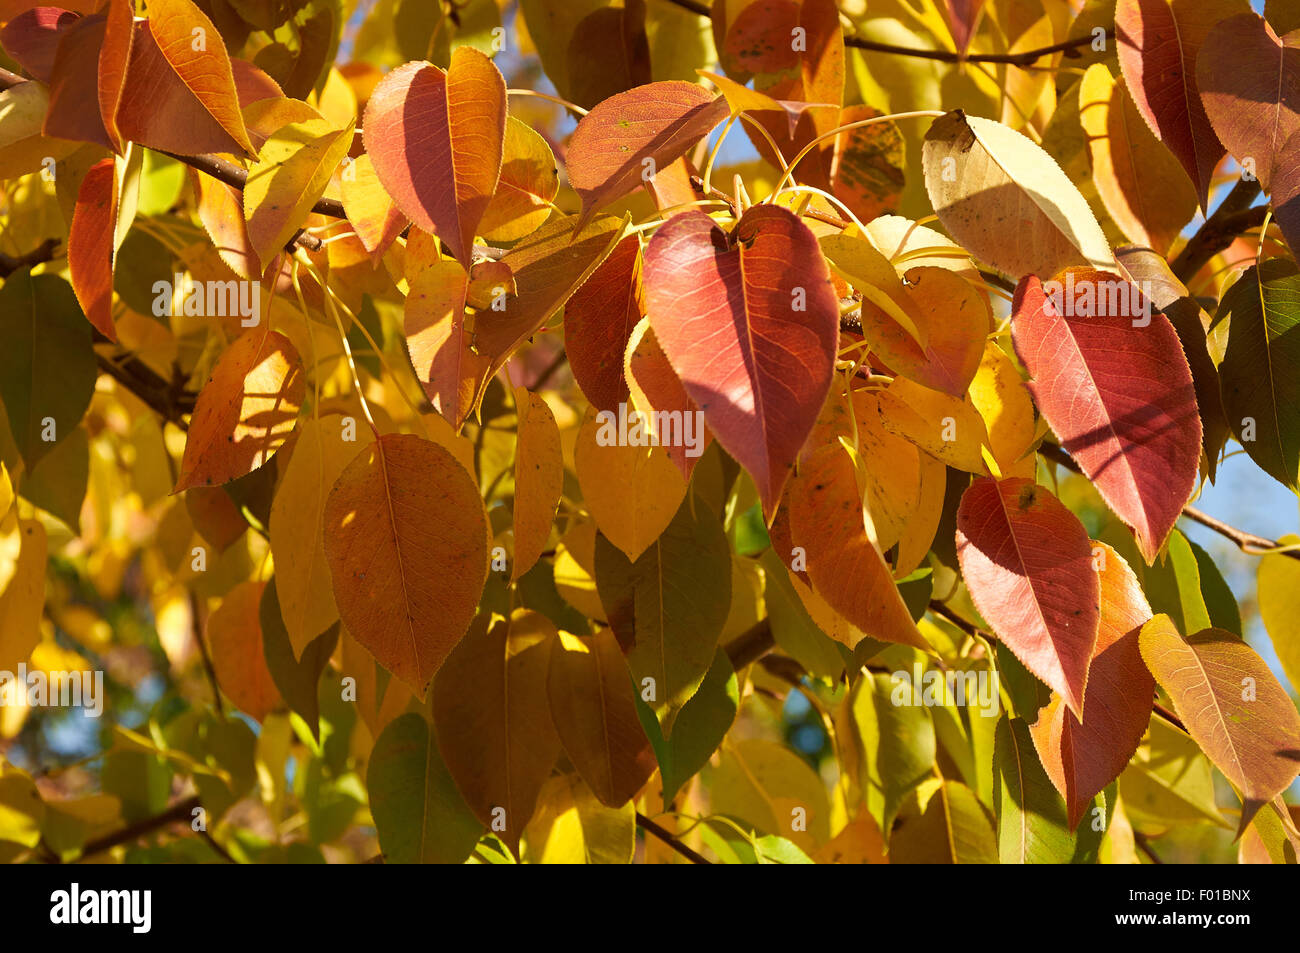 Bright red and yellow leaves of pear tree Stock Photo